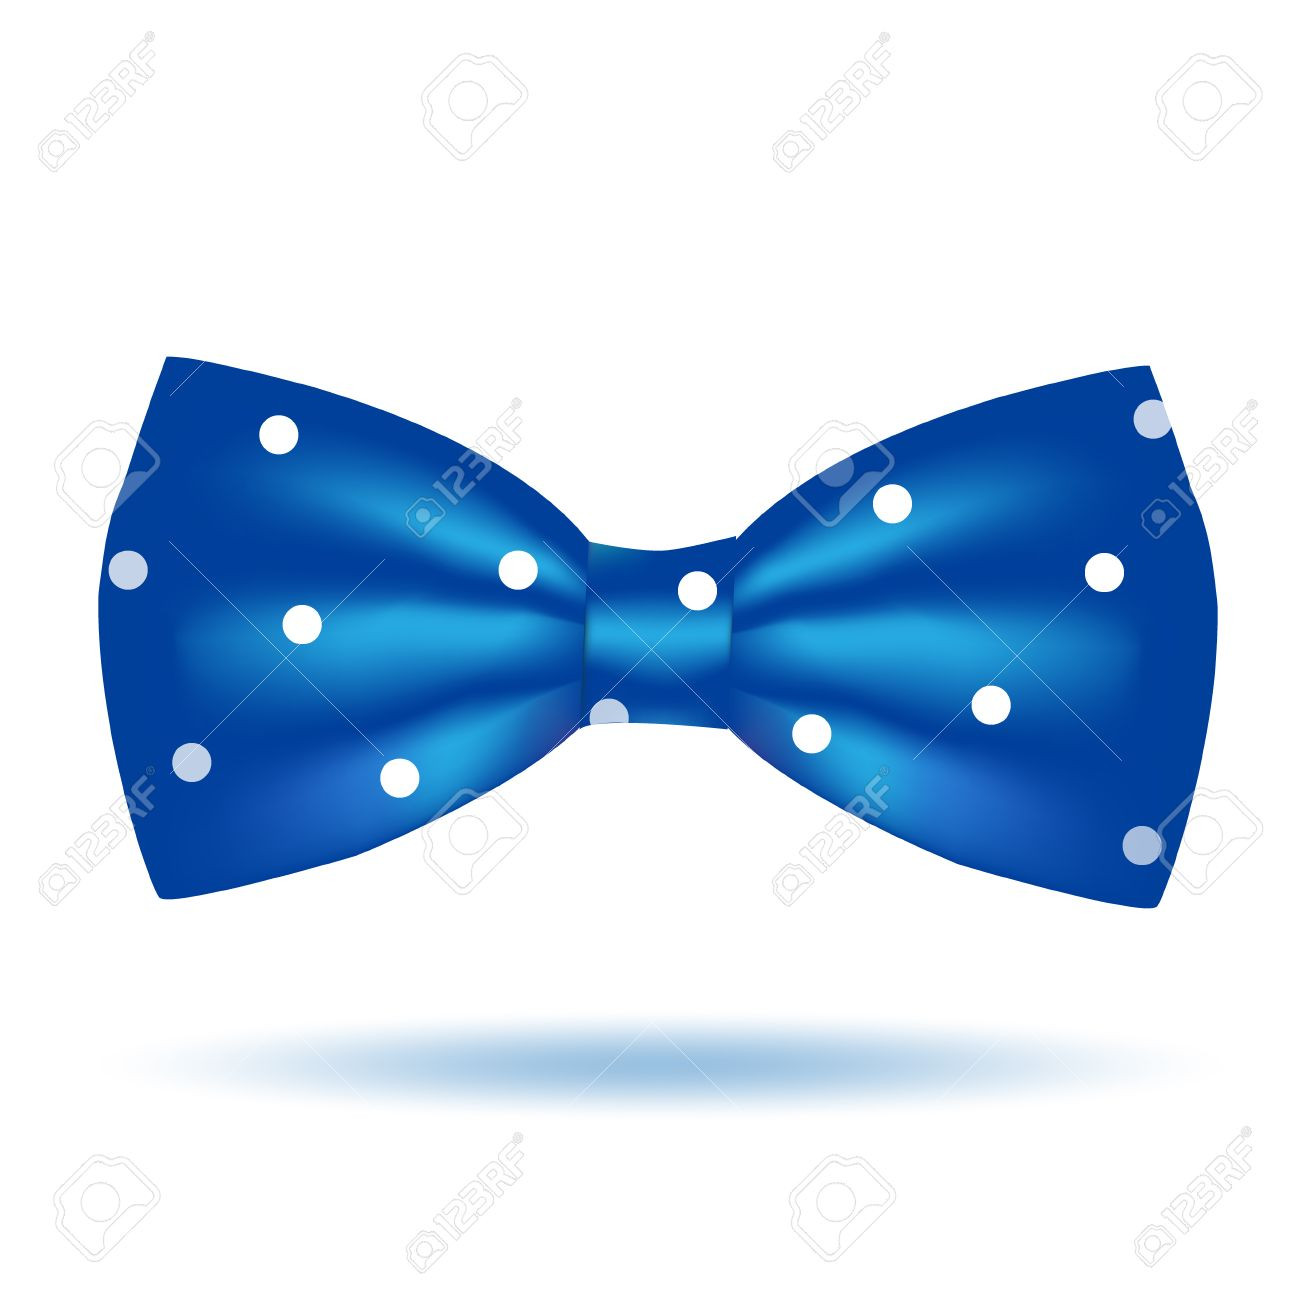 Bow Tie Clipart at GetDrawings.com.